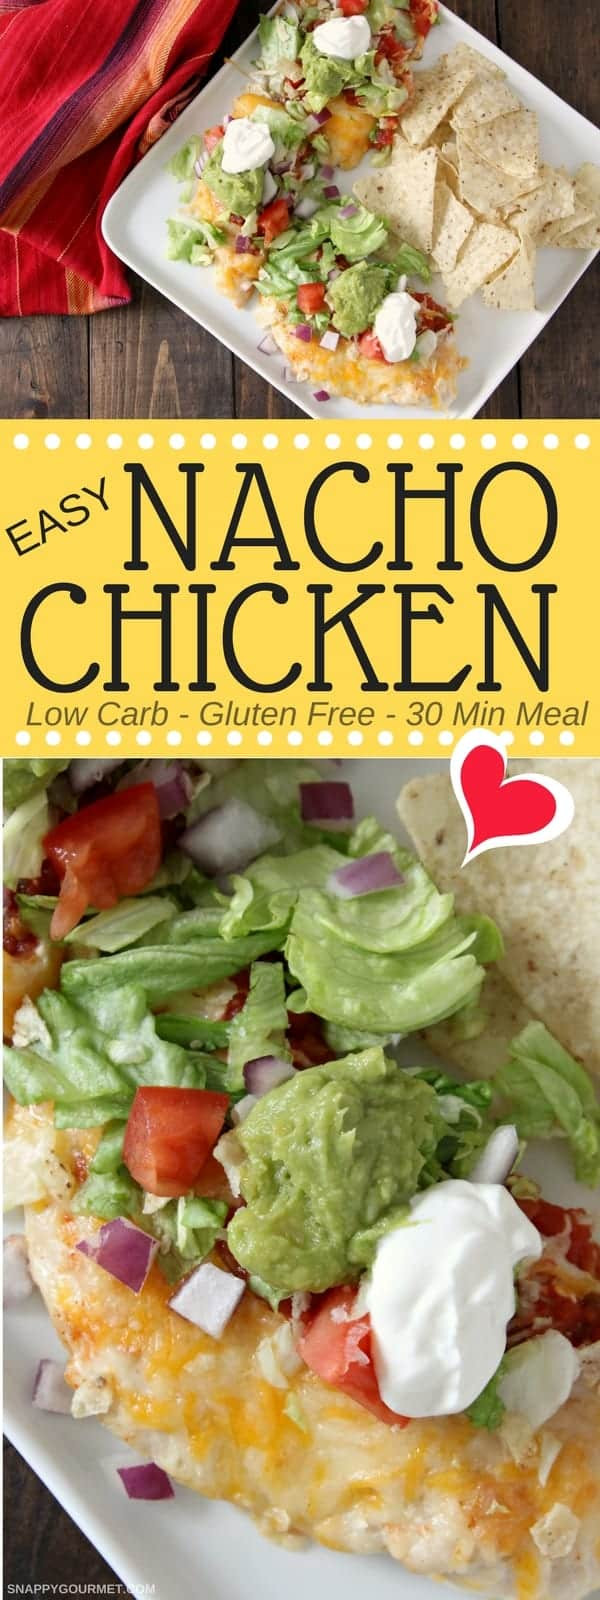 Gourmet Low Carb Recipes
 Nacho Chicken Easy Low Carb Baked Chicken Recipe